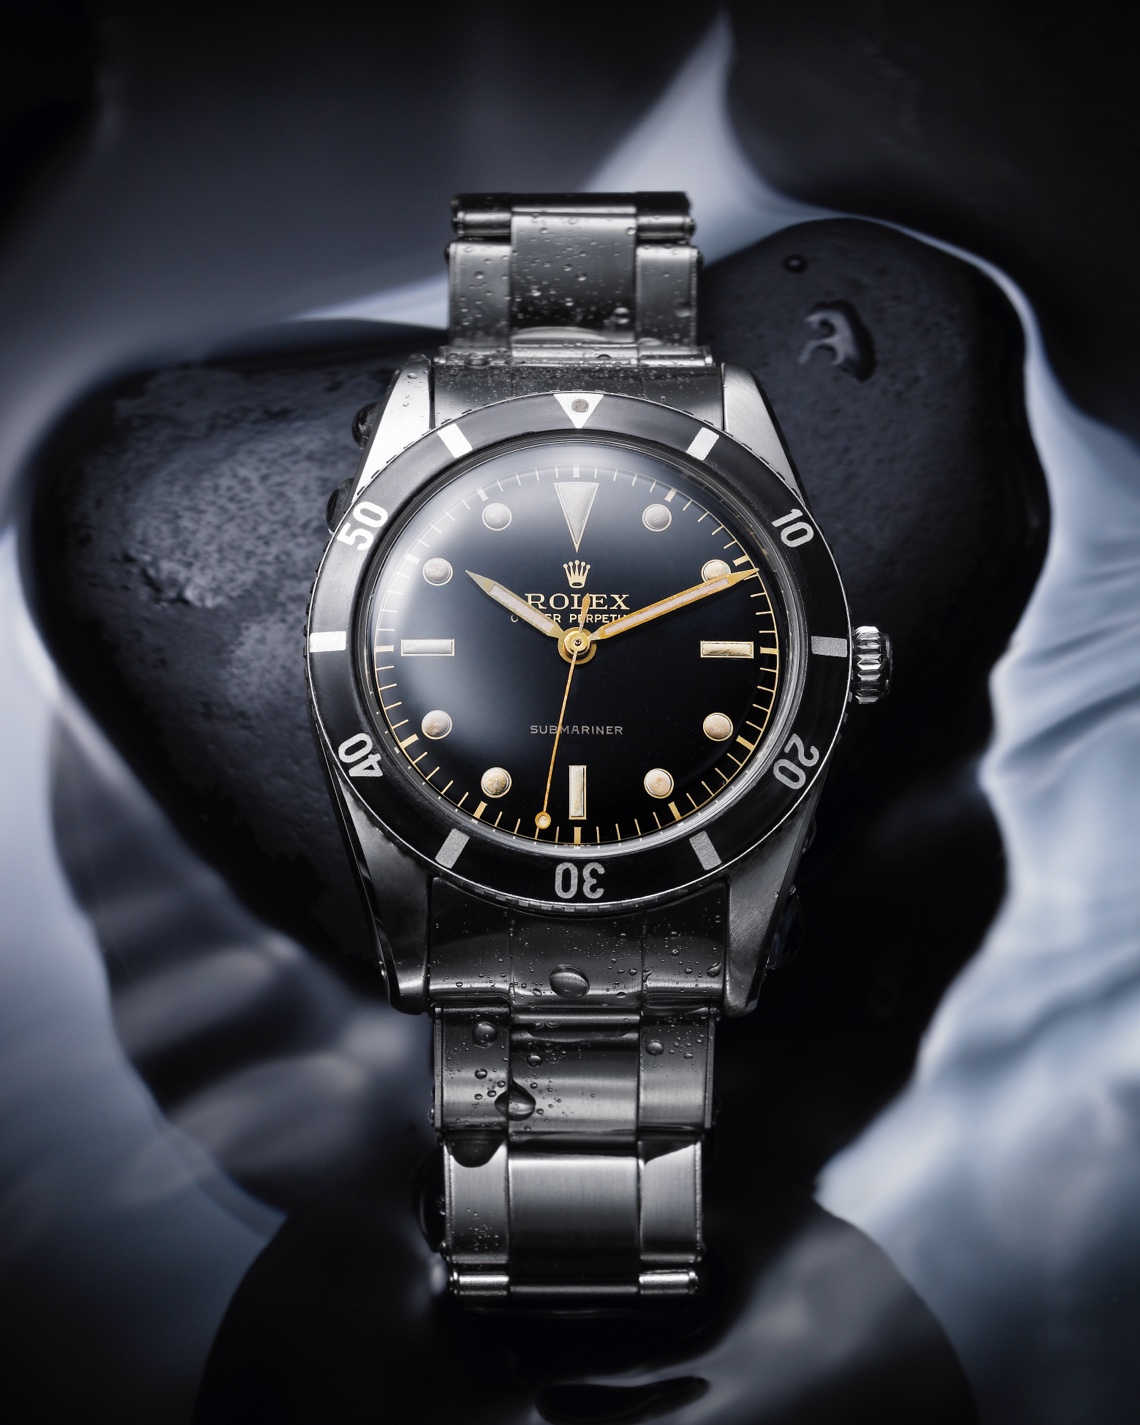 The reference among diver's watches